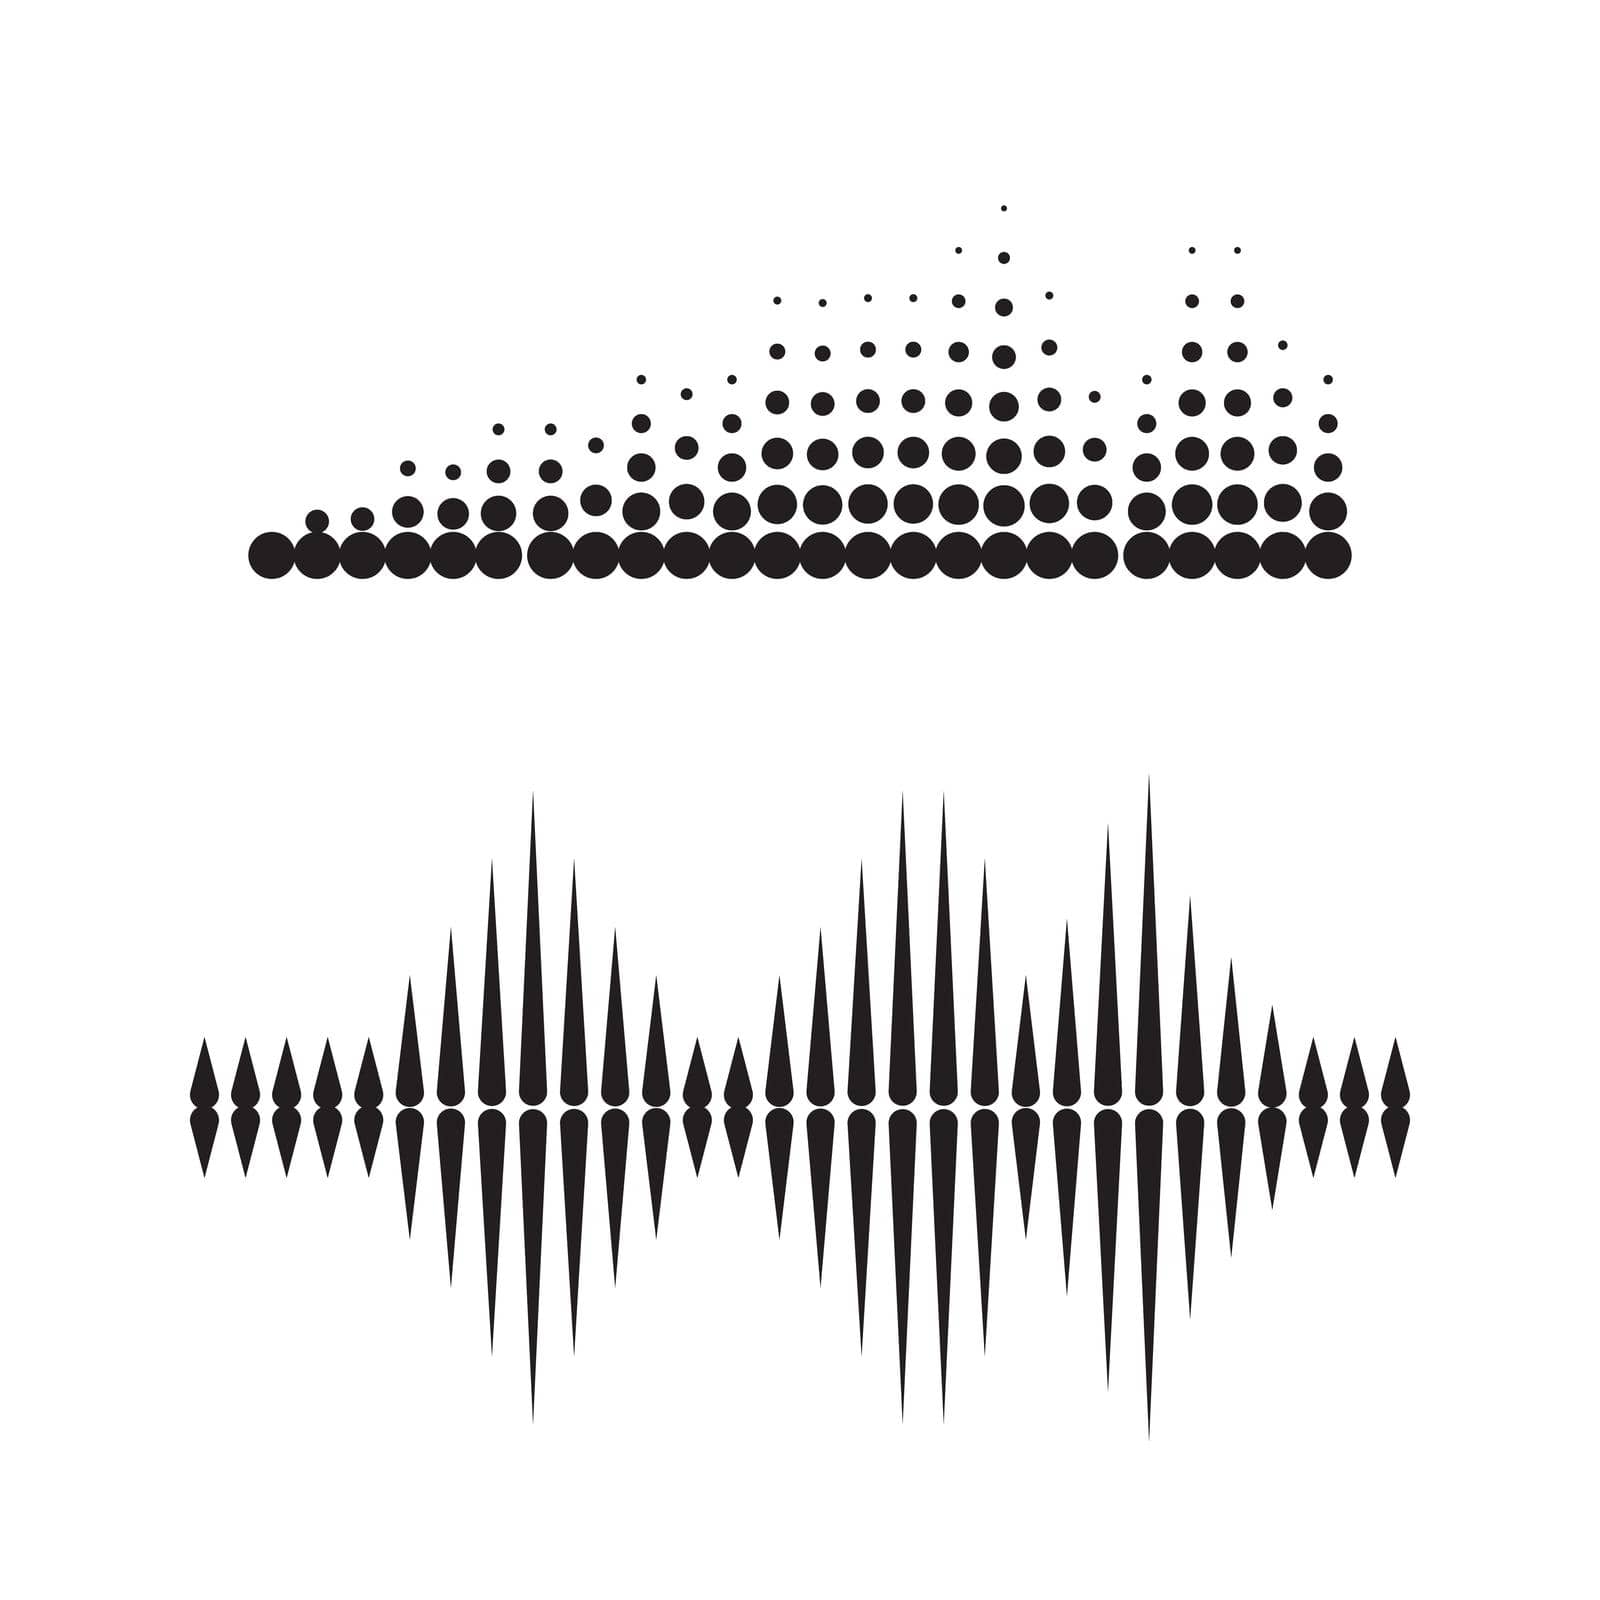 Sound waves vector illustration by Redgraphic